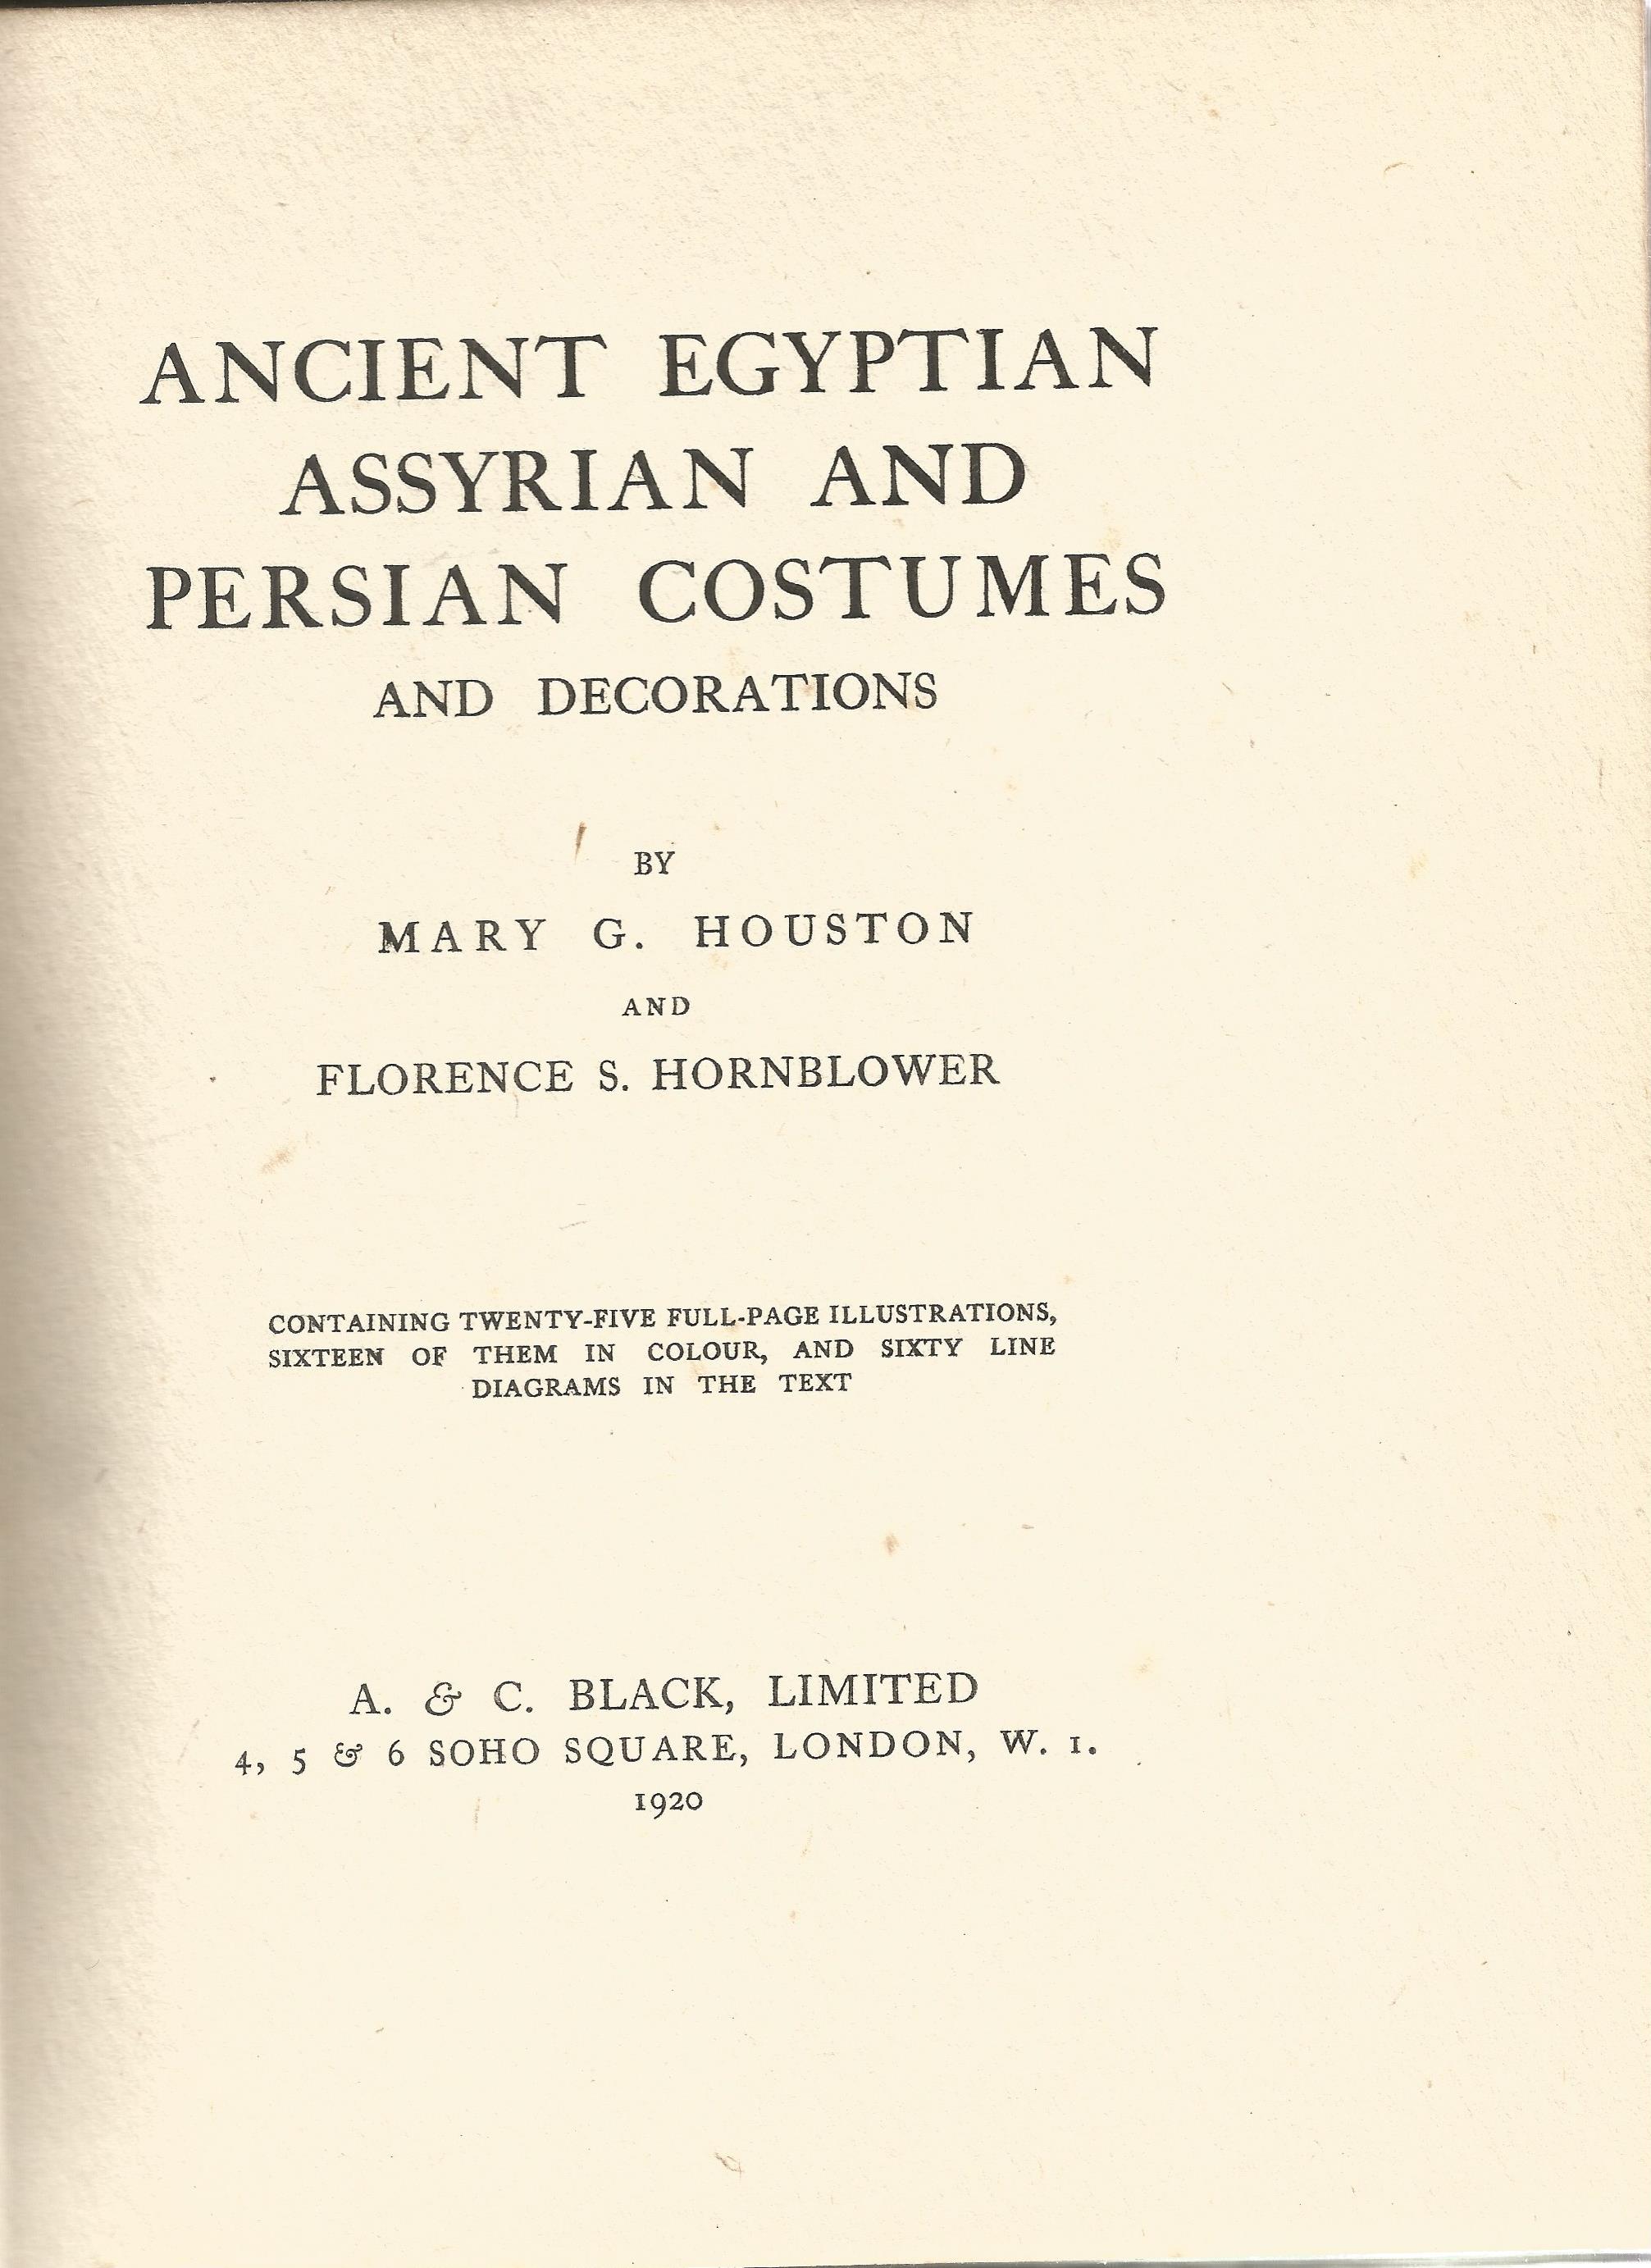 Ancient Egyptian Assyrian and Persian Costumes and Decorations by M G Houston and F Hornblower - Image 2 of 2